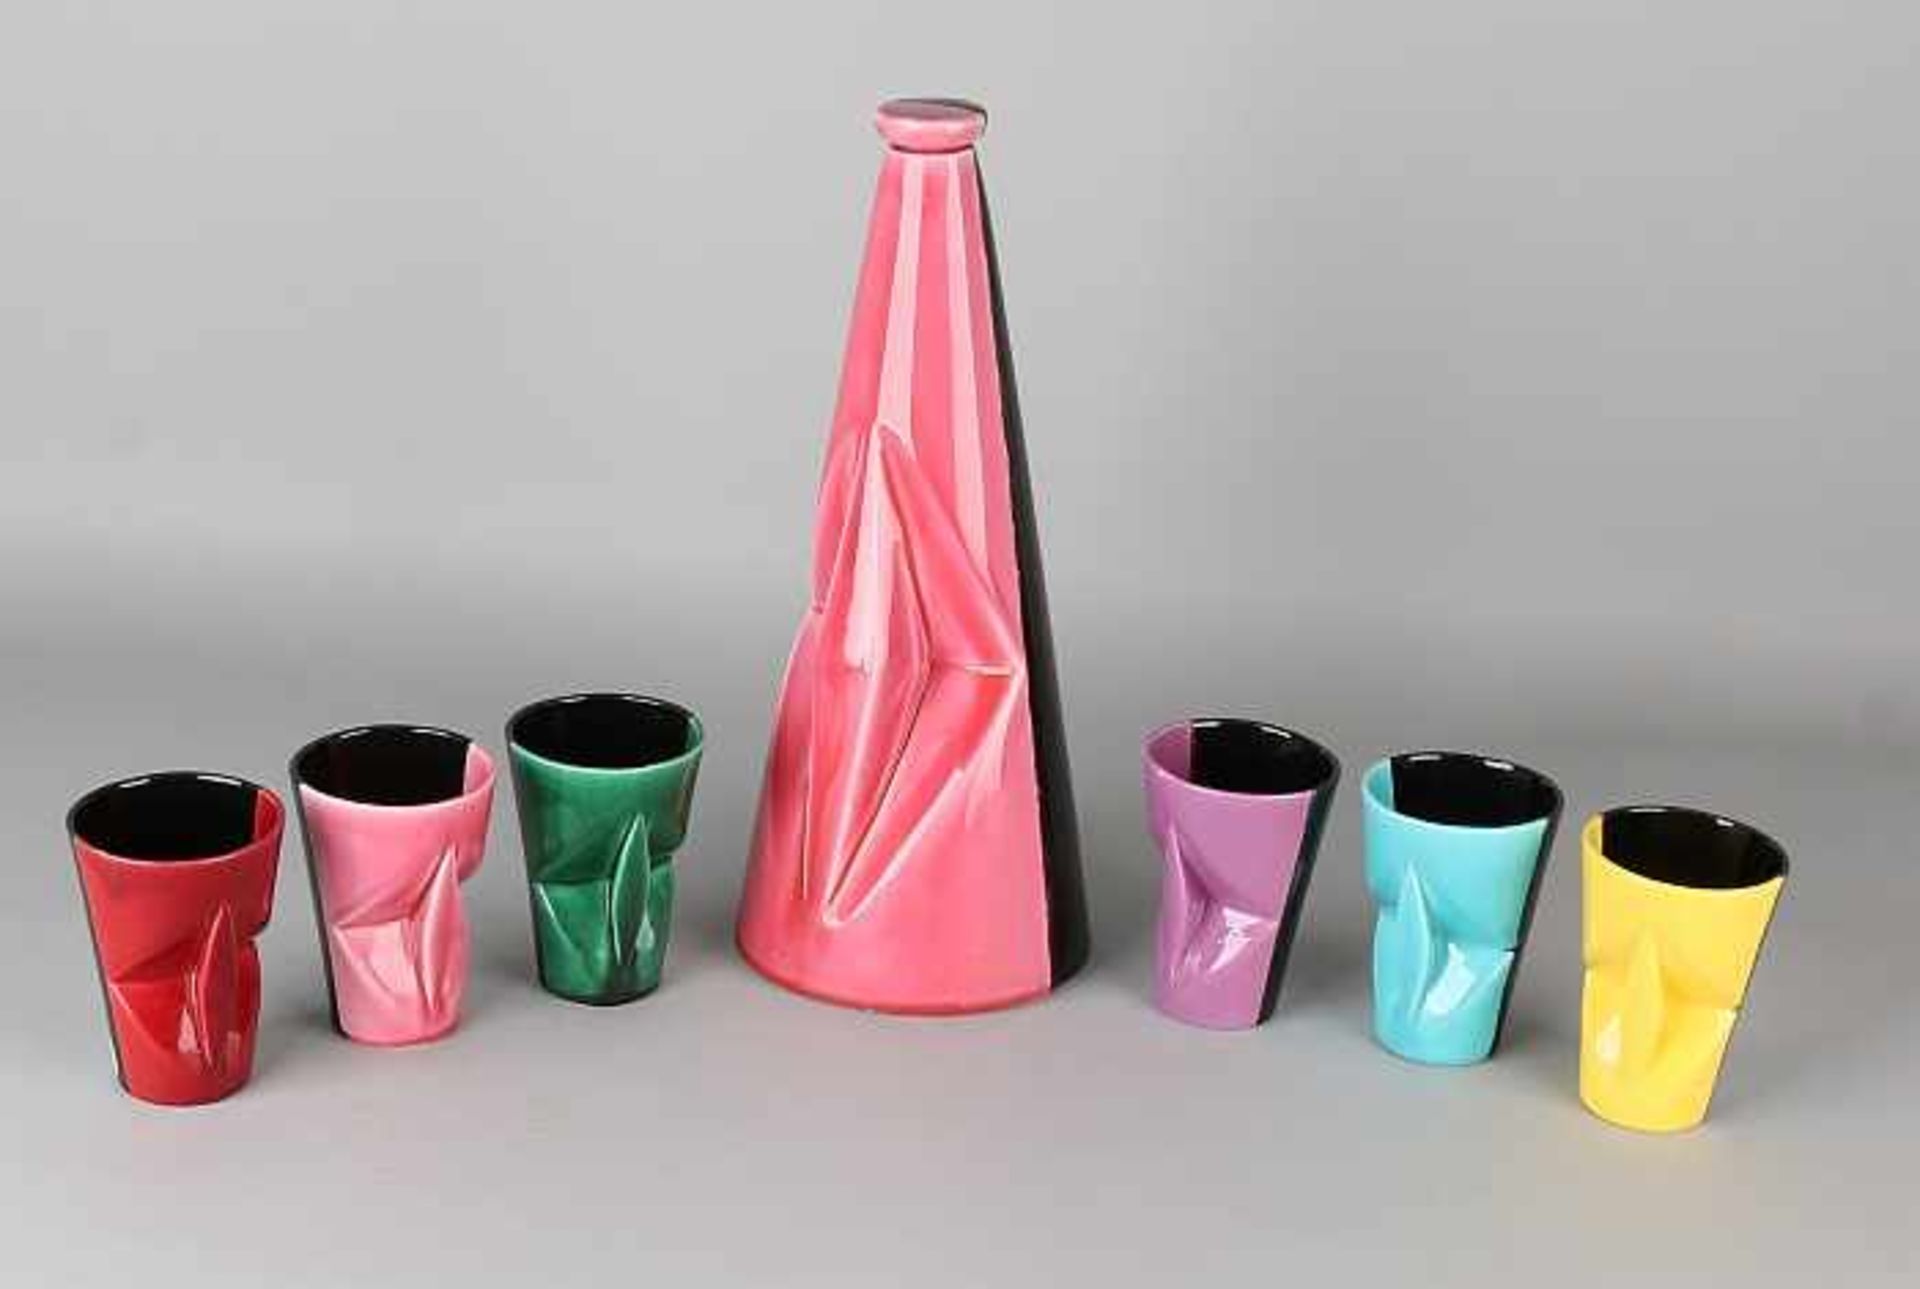 60-Year Art Deco-style ceramic carafe set with colored glaze. Comprising pour decanter + six cups.